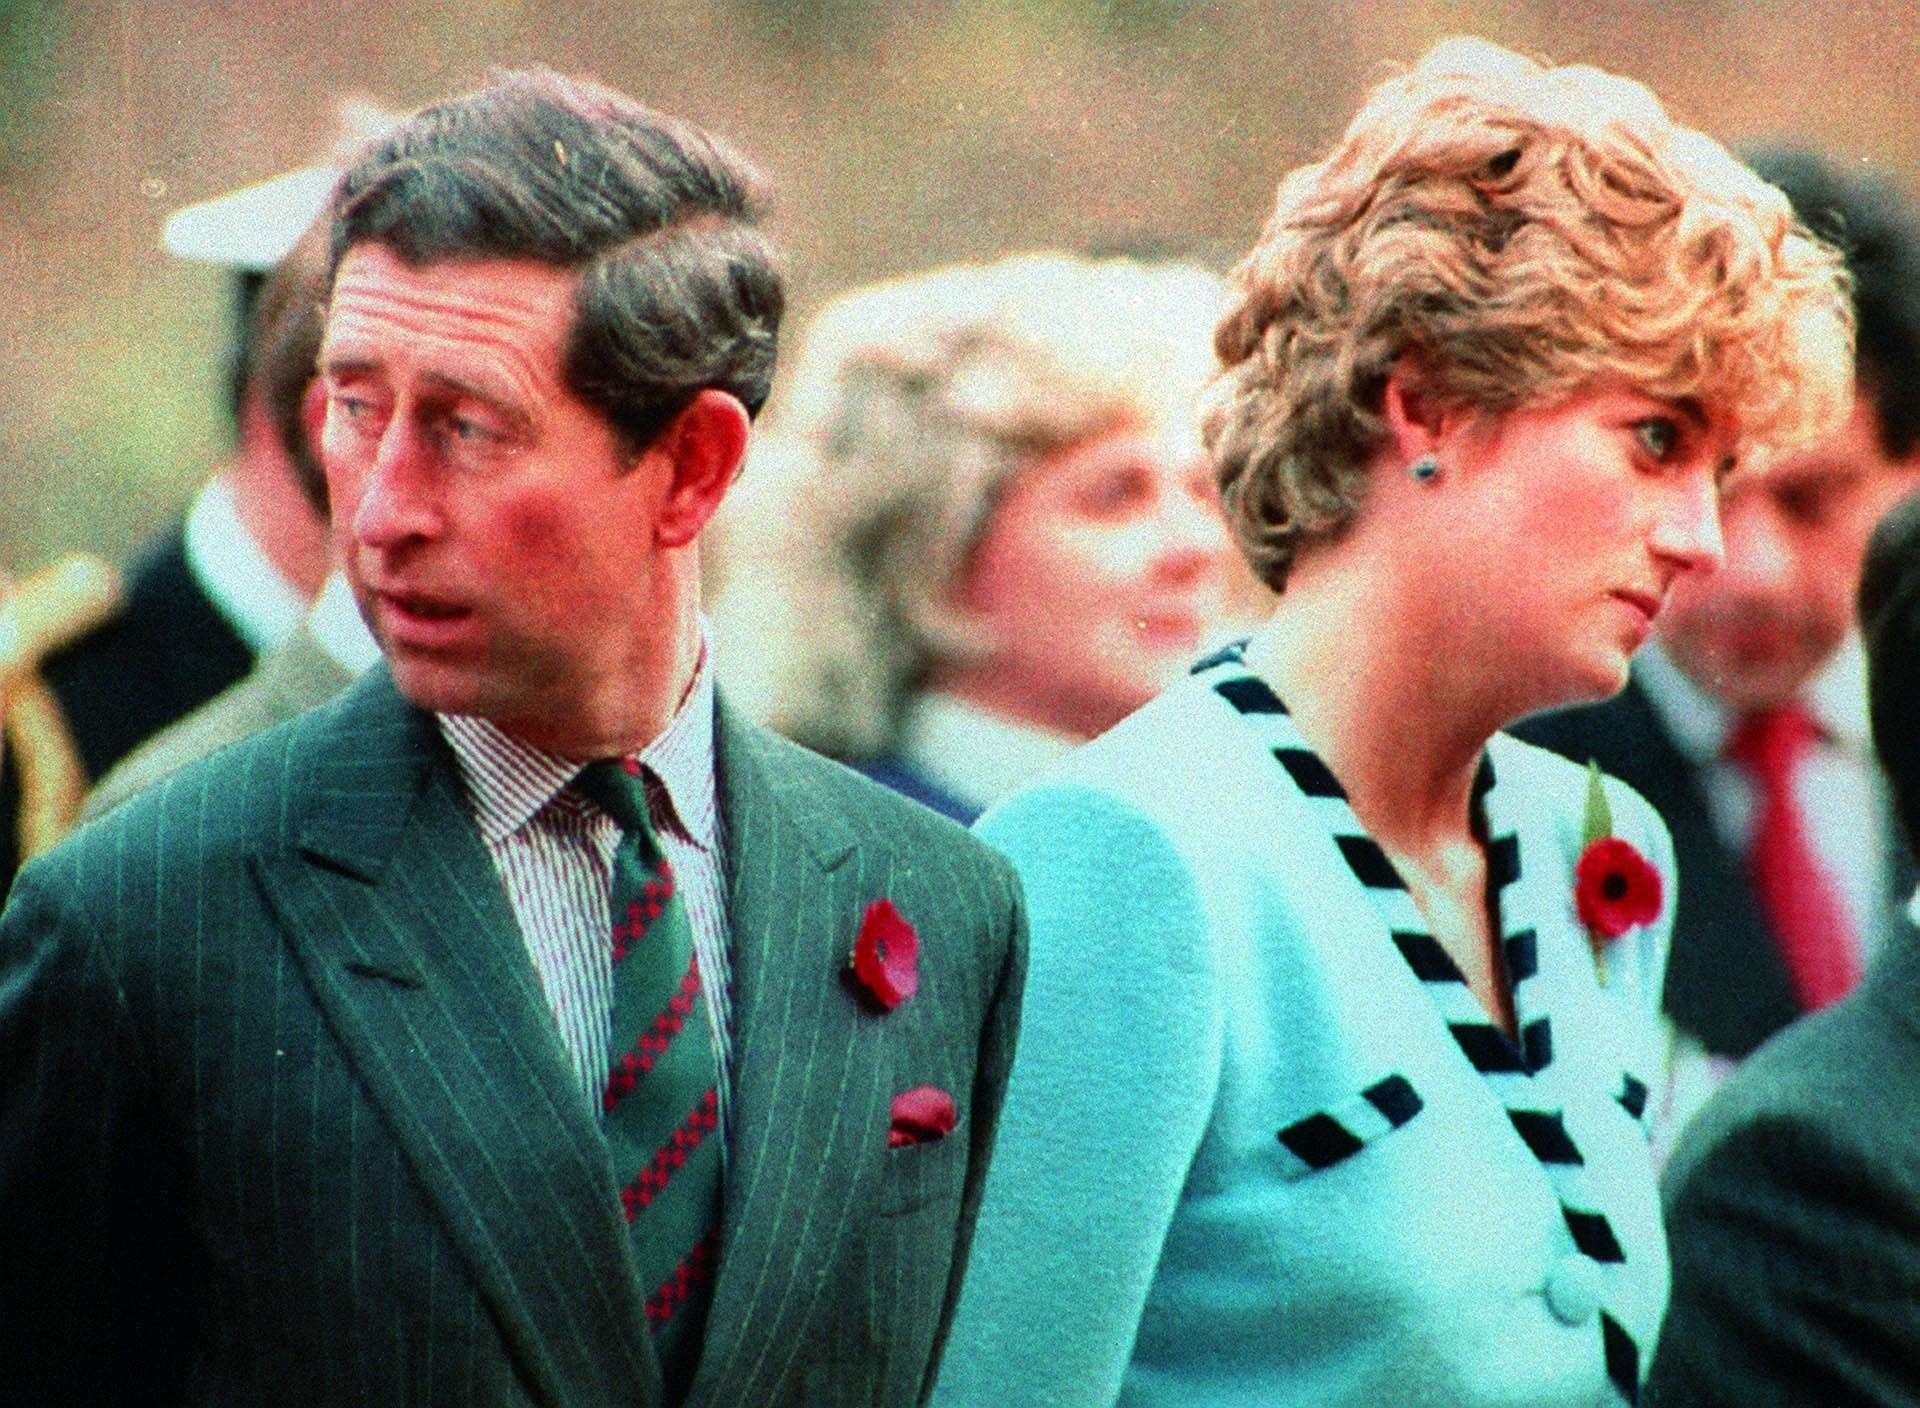 The Prince and Princess of Wales at a memorial outside Seoul, South Korea, in 1992 (PA)